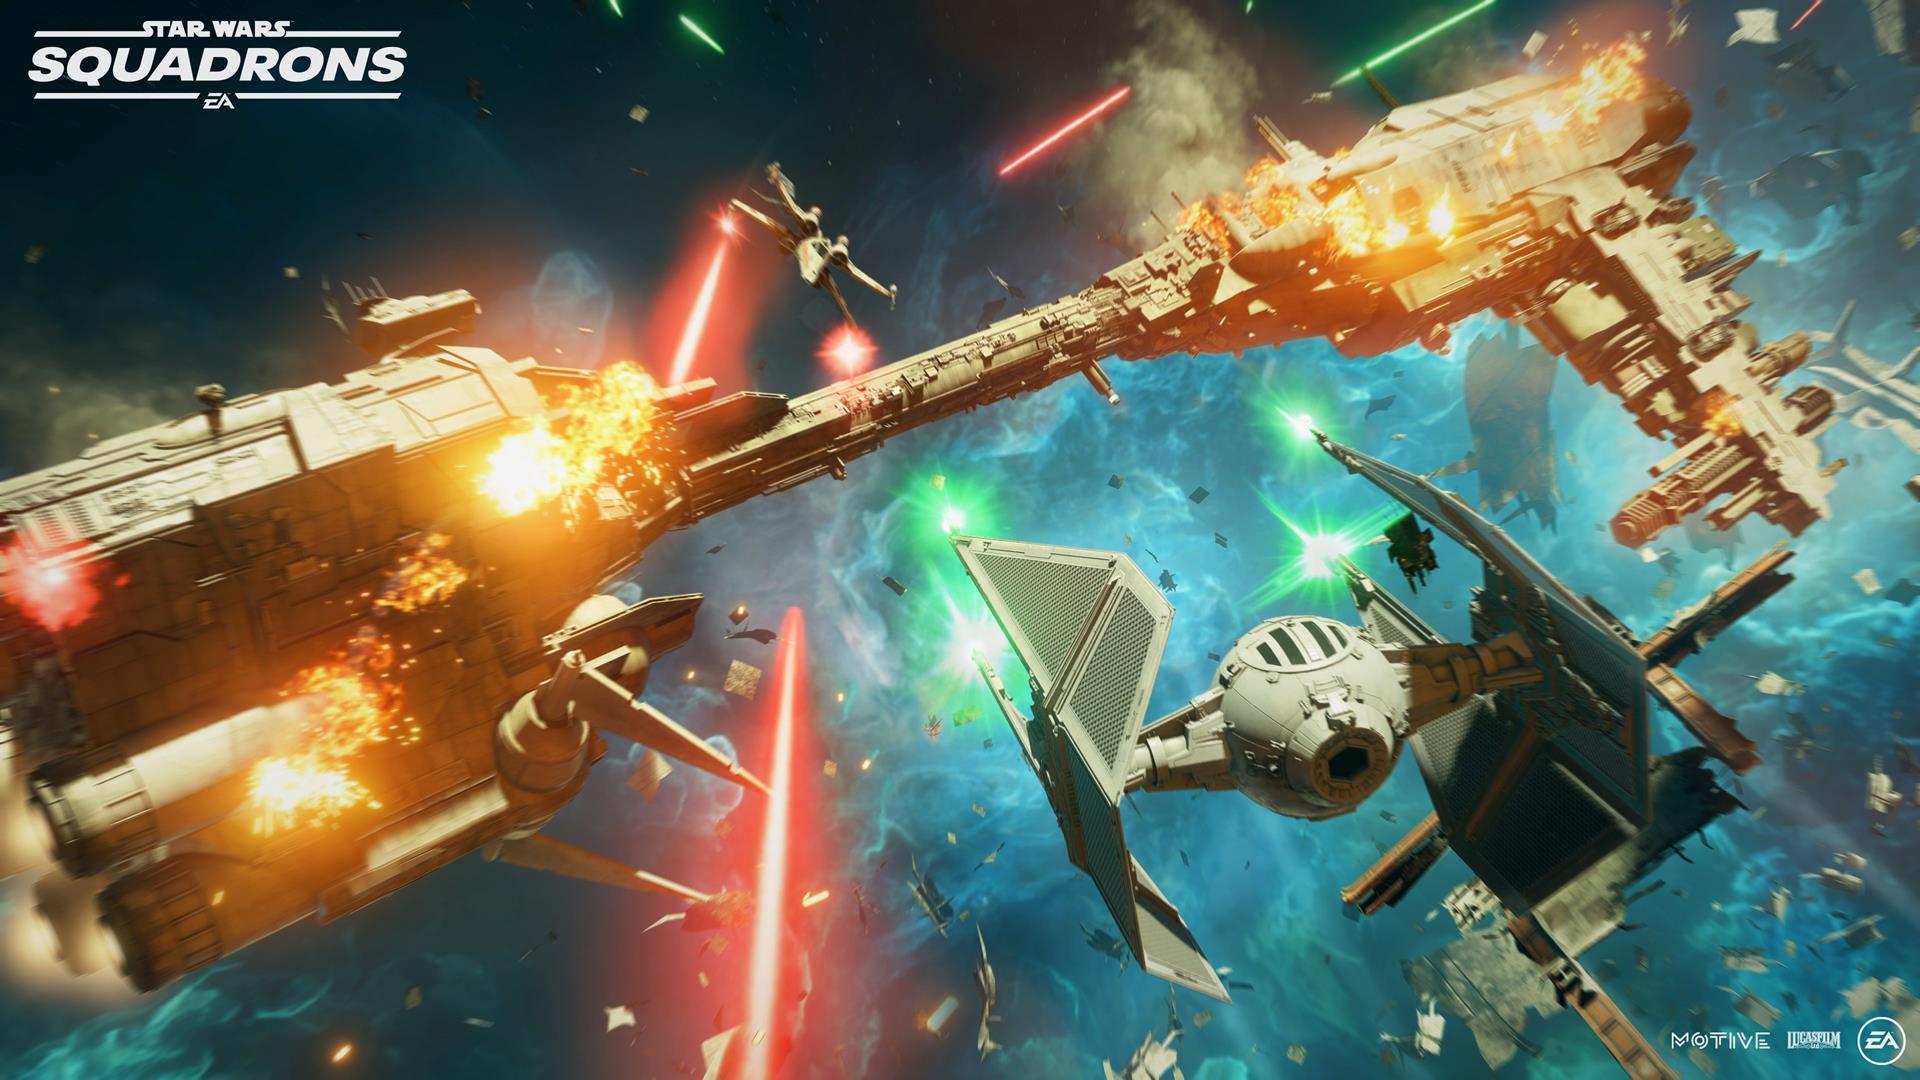 Image for Star Wars: Squadrons – here’s a look at the single-player